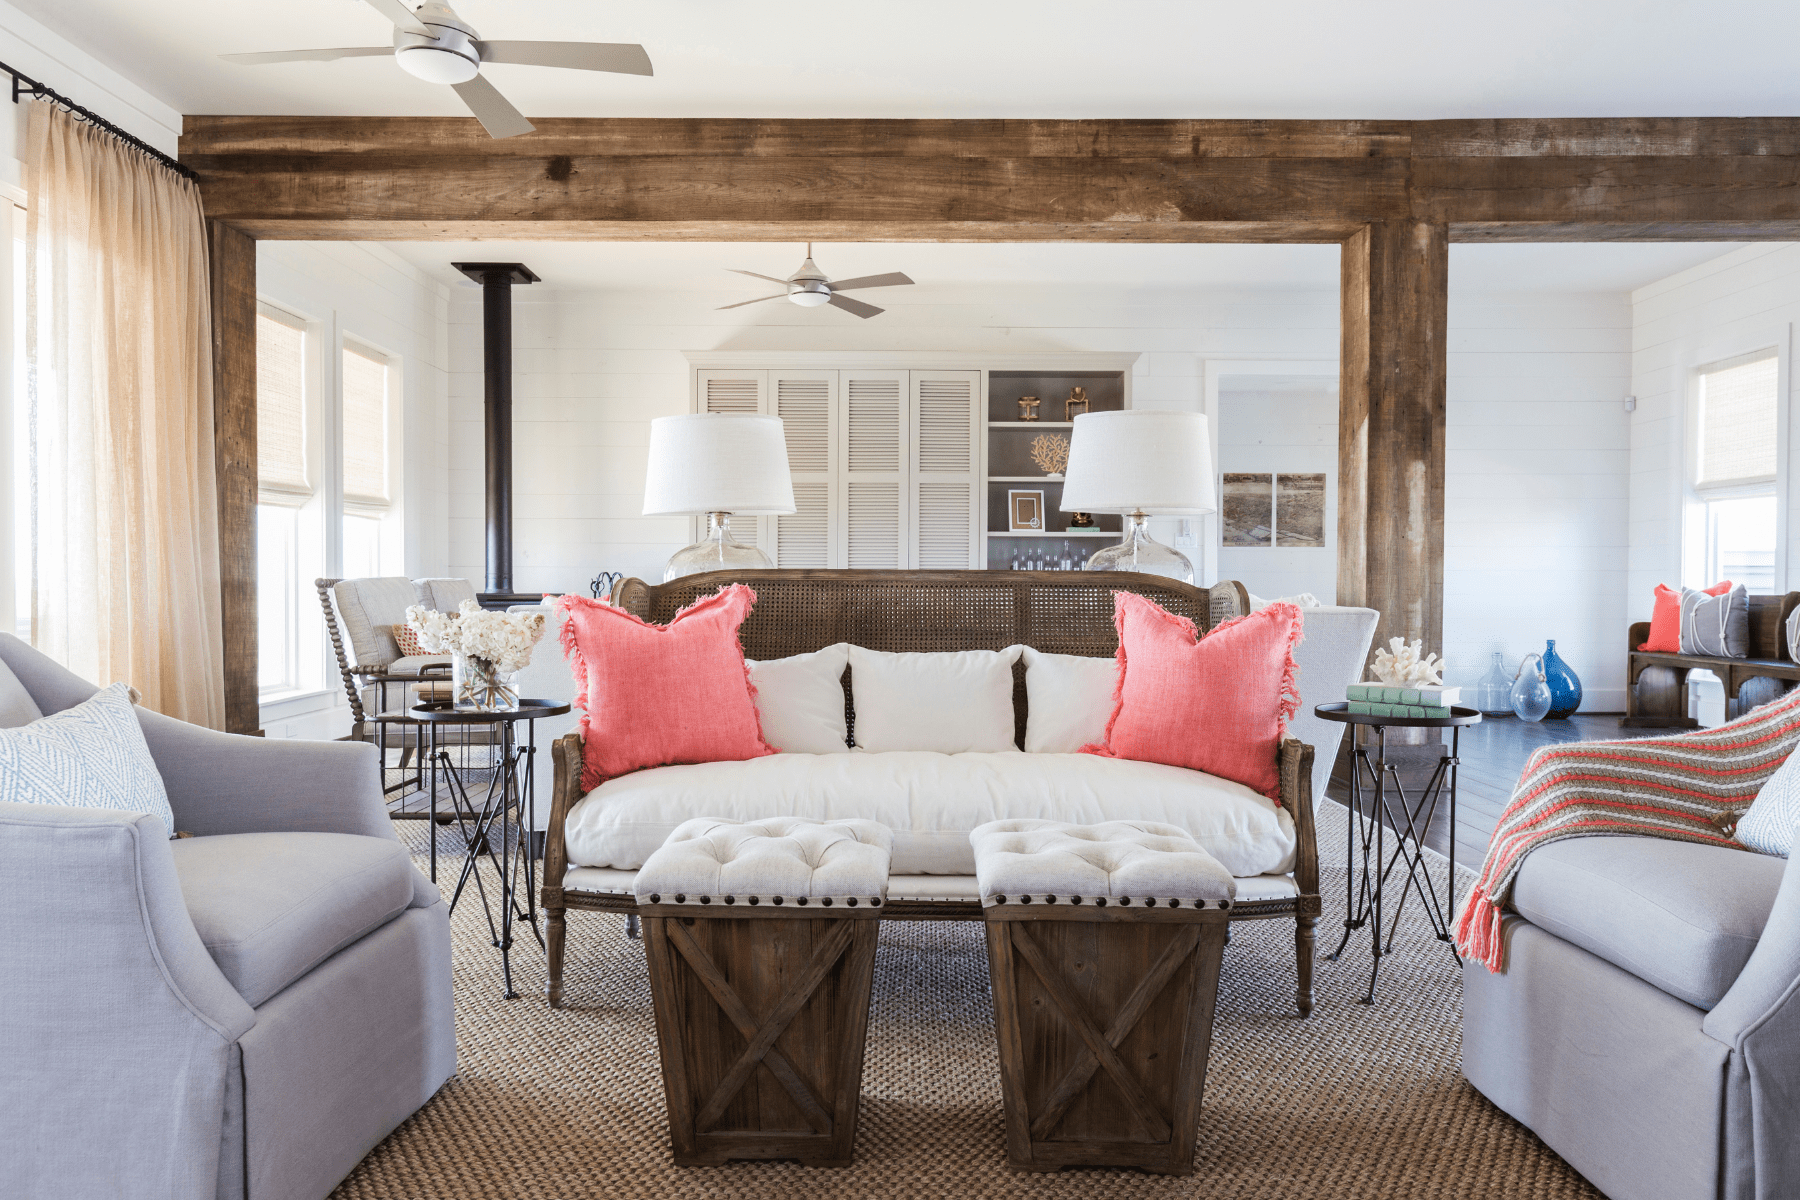 The large open concept living area at Sandhill Shores framed by our selection of wooden beams.